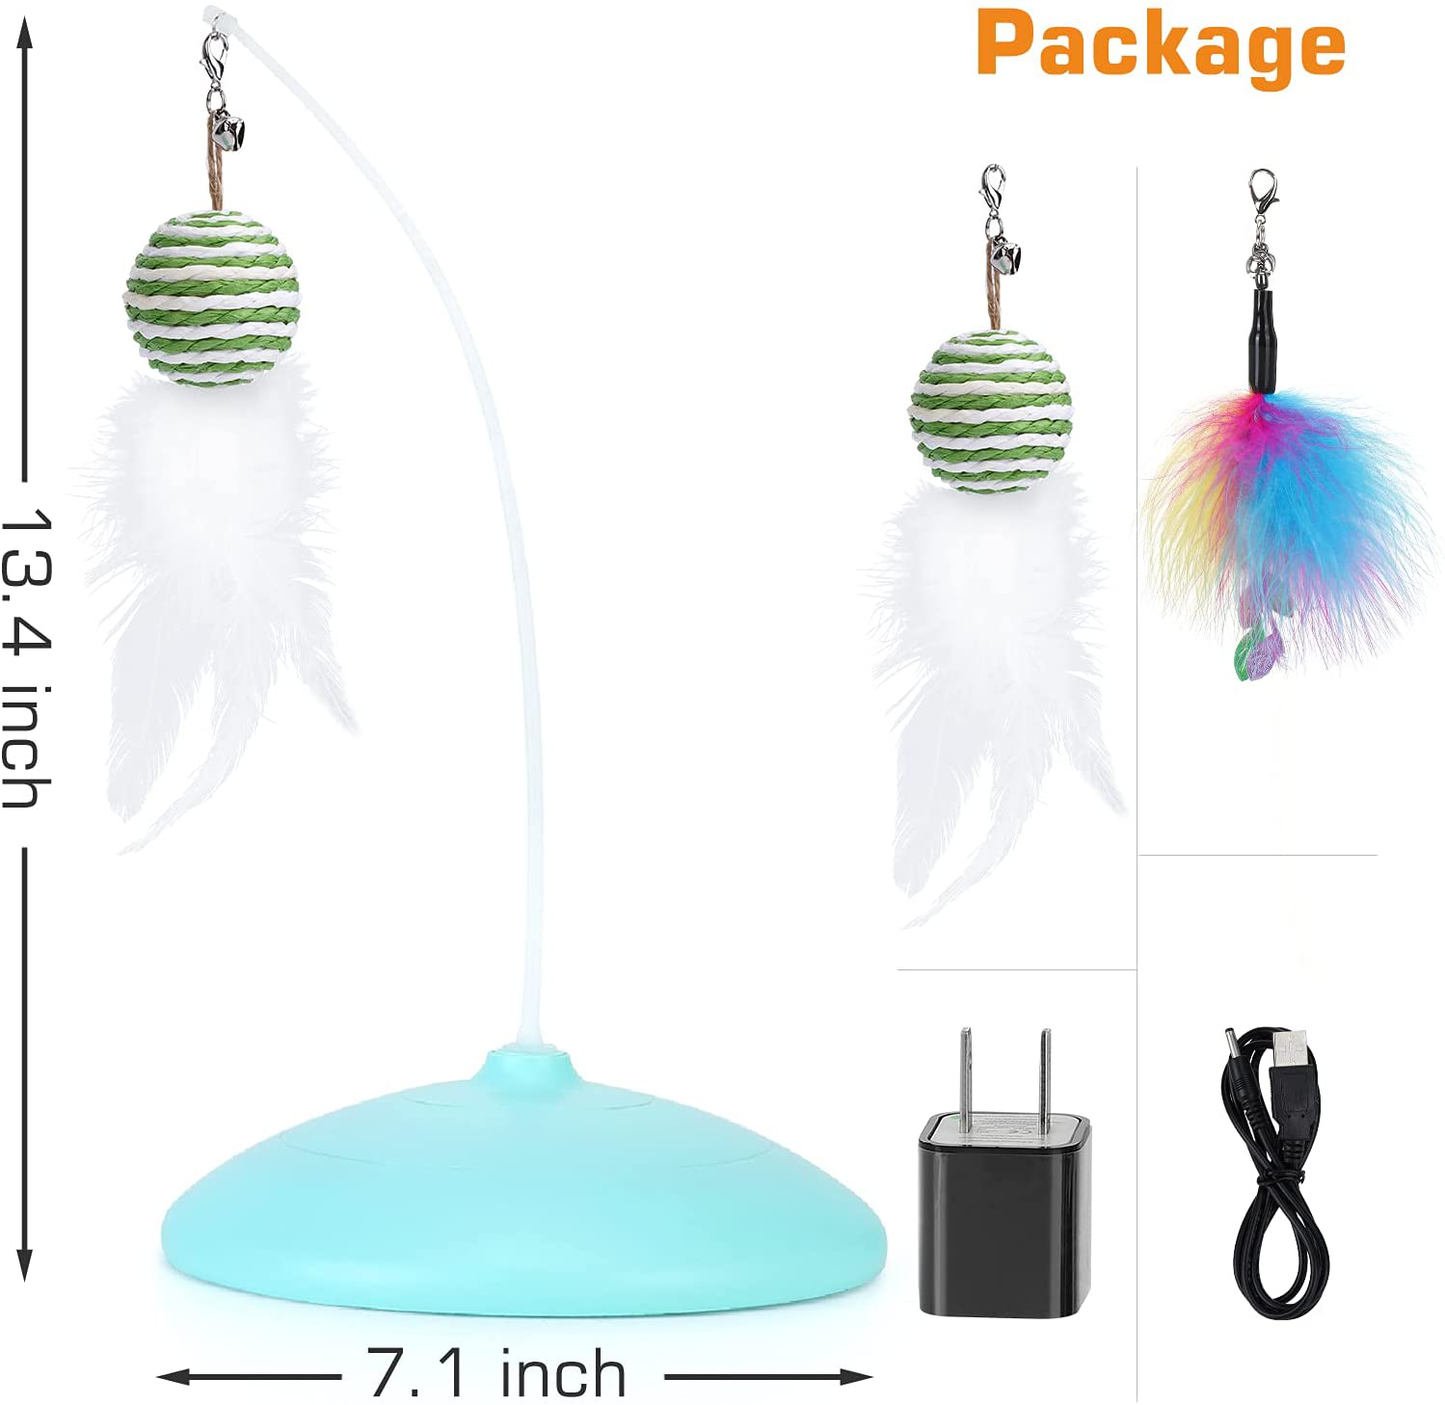 Cat Toy Kitten Toy Interactive Automatic Cat Toys for Indoor Cat, Electric Cat Feather Toy Teaser Small Cat, Rechargeable Rotating for Puzzle Brain Stimulate Hunting Instinct